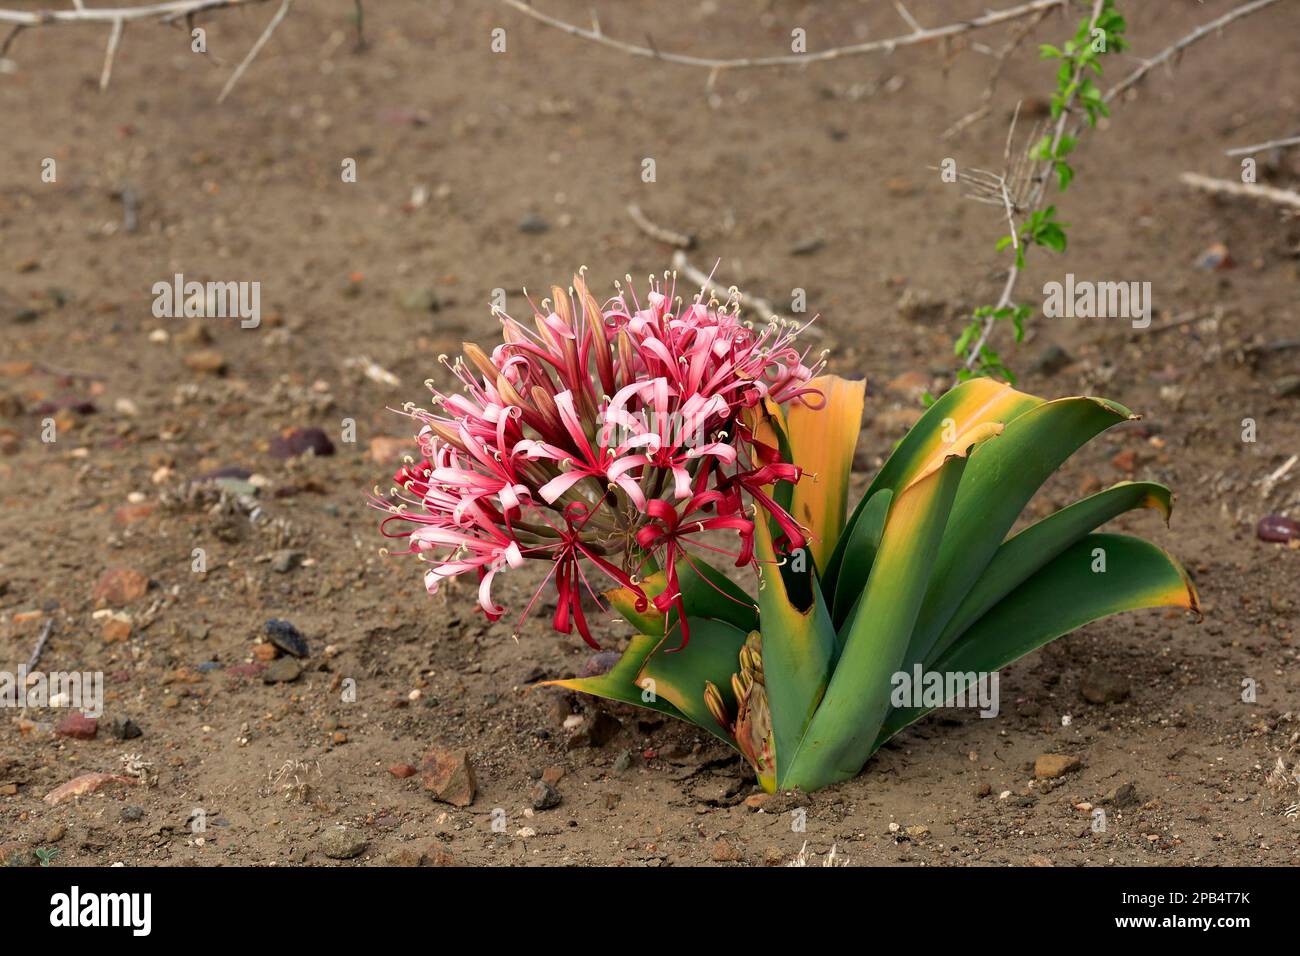 South african crinum lily (Crinum buphanoides), flower, blooming, Kruger National Park, South Africa, Africa Stock Photo